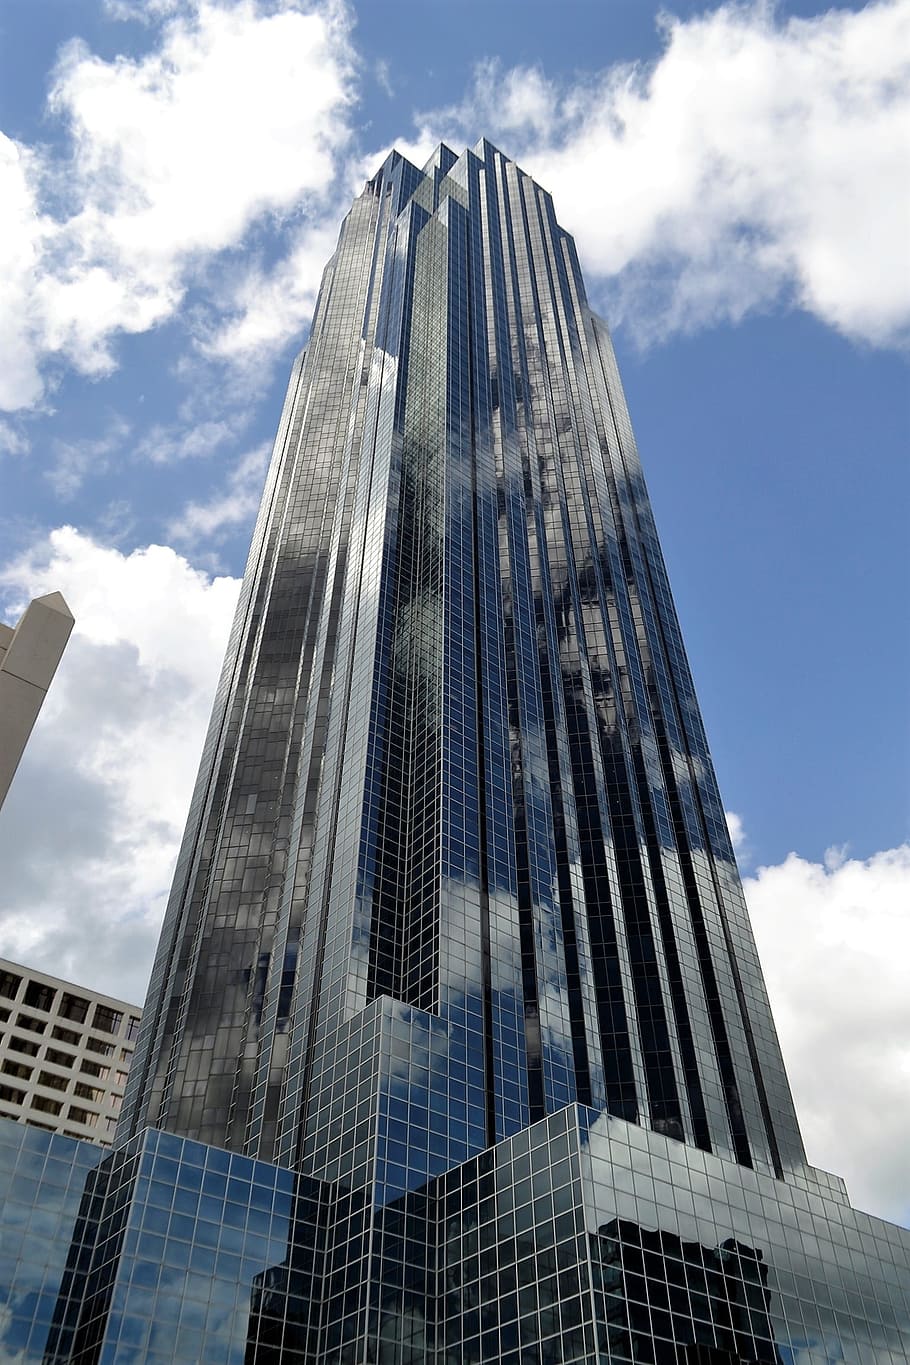 low, angle photography, glass, high-rise, building, blue, cloudy, sky, daytime, skyscraper